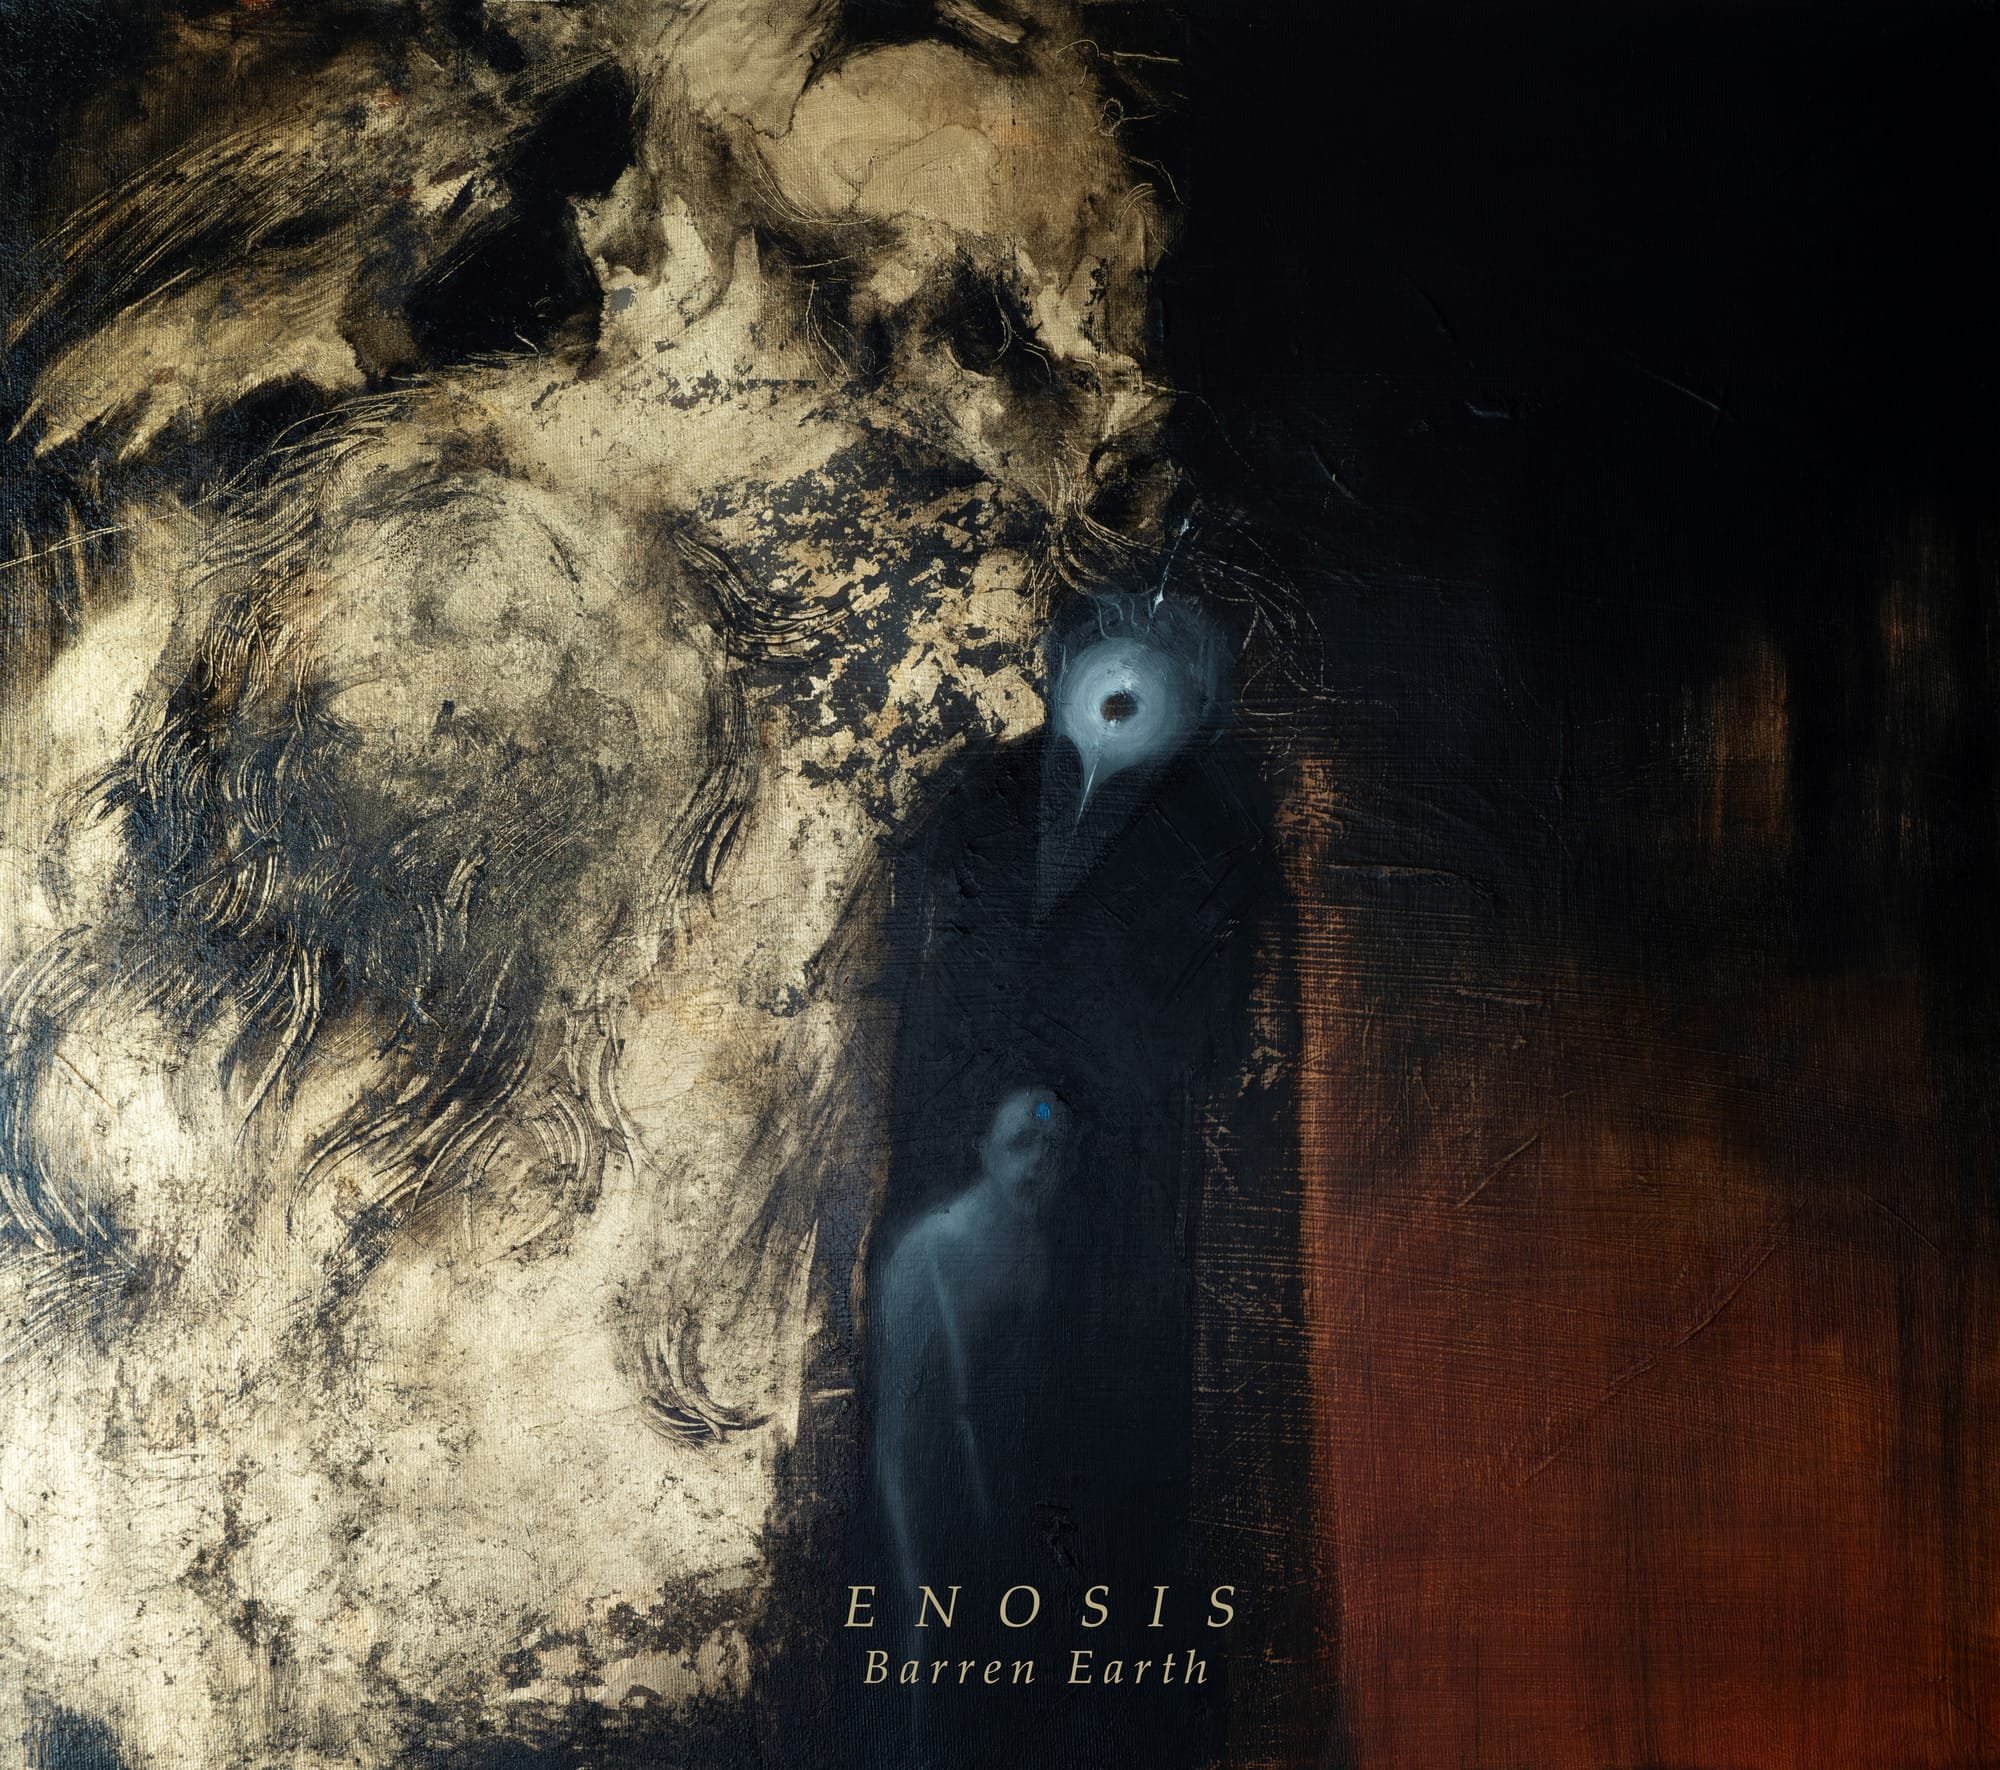 Interview with ENOSIS